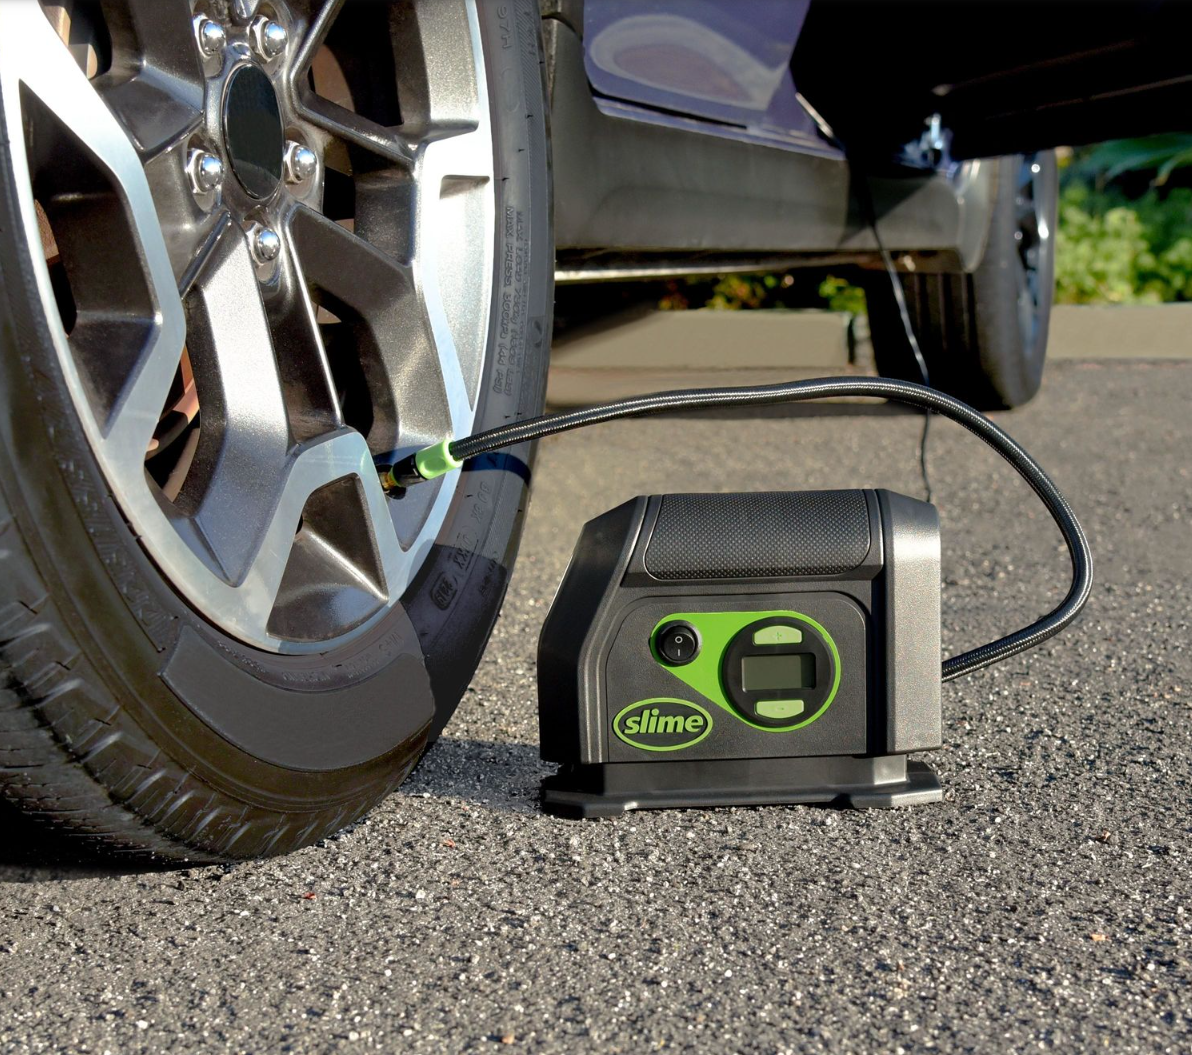 https://azblogsingle.wpengine.com/wp-content/uploads/2023/07/www.autozone.com_tire-repair-and-tire-wheel_portable-tire-inflator_p_slime-12-volt-digital-inflator-with-led-light_989586_0_0.png